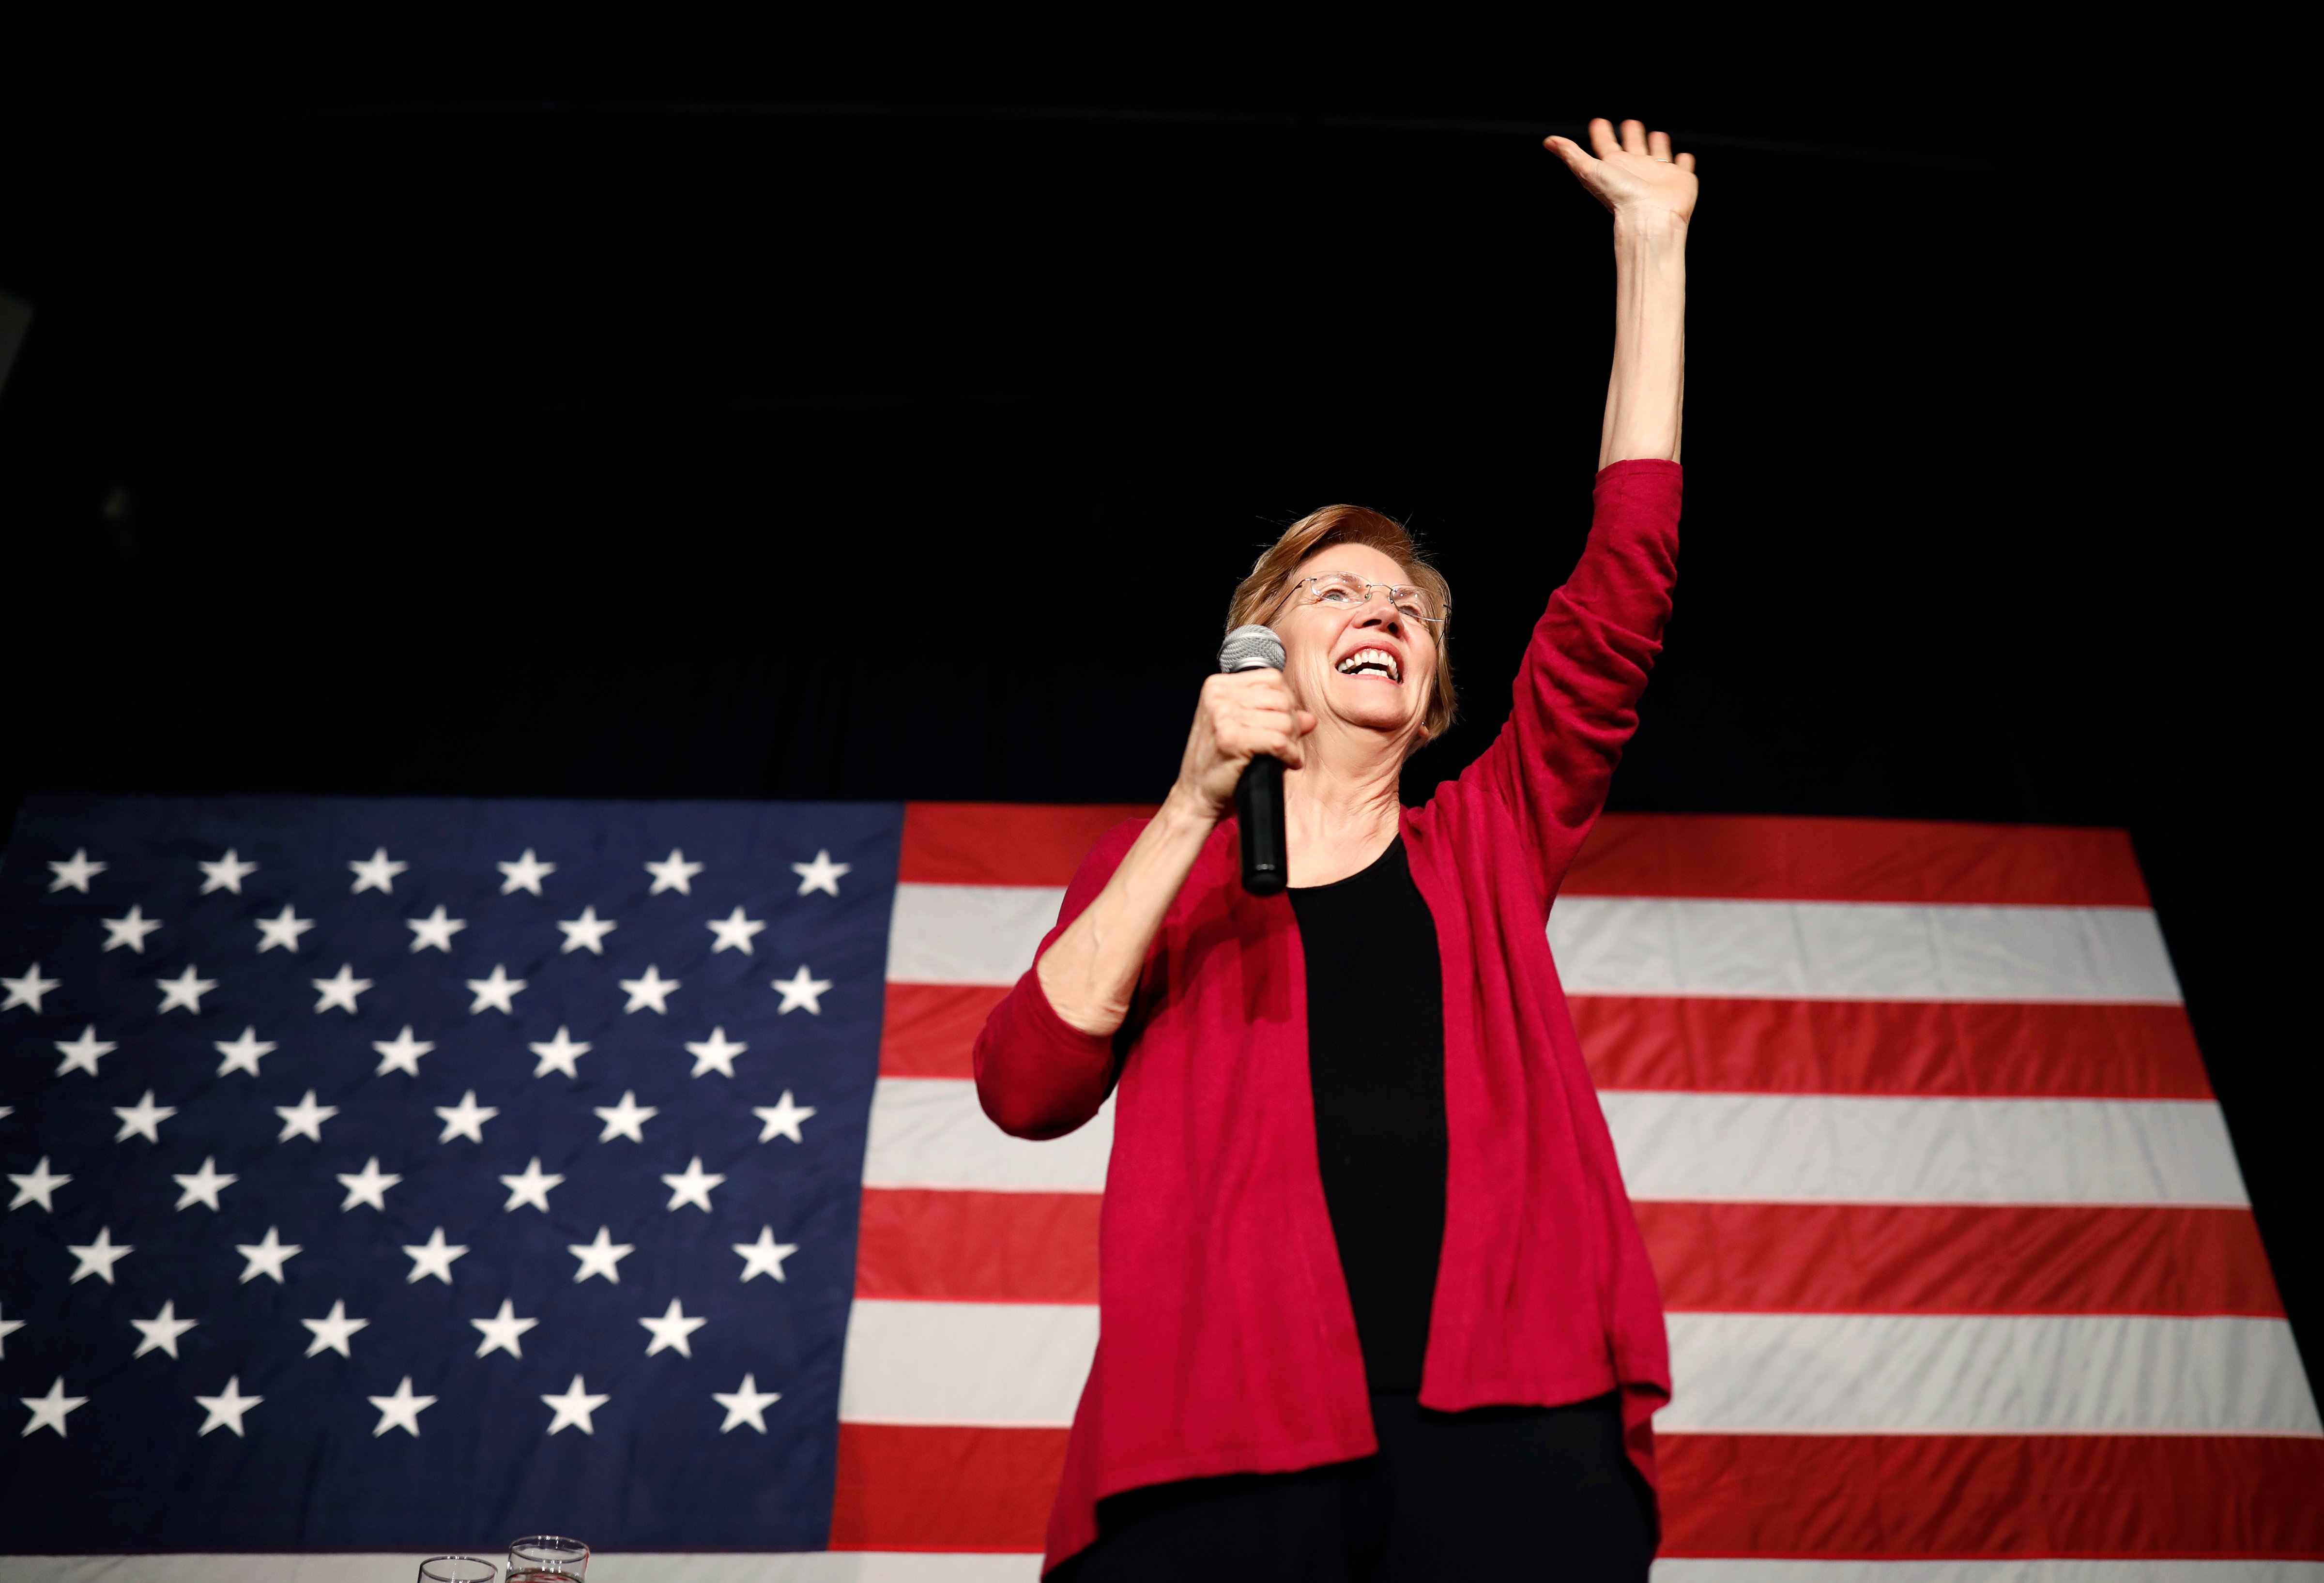 Sen. Elizabeth Warren, D-Mass, waves to the crowd during an organizing event at Curate event space in Des Moines, Iowa, Saturday, Jan. 5, 2019. (Matthew Putney—AP)